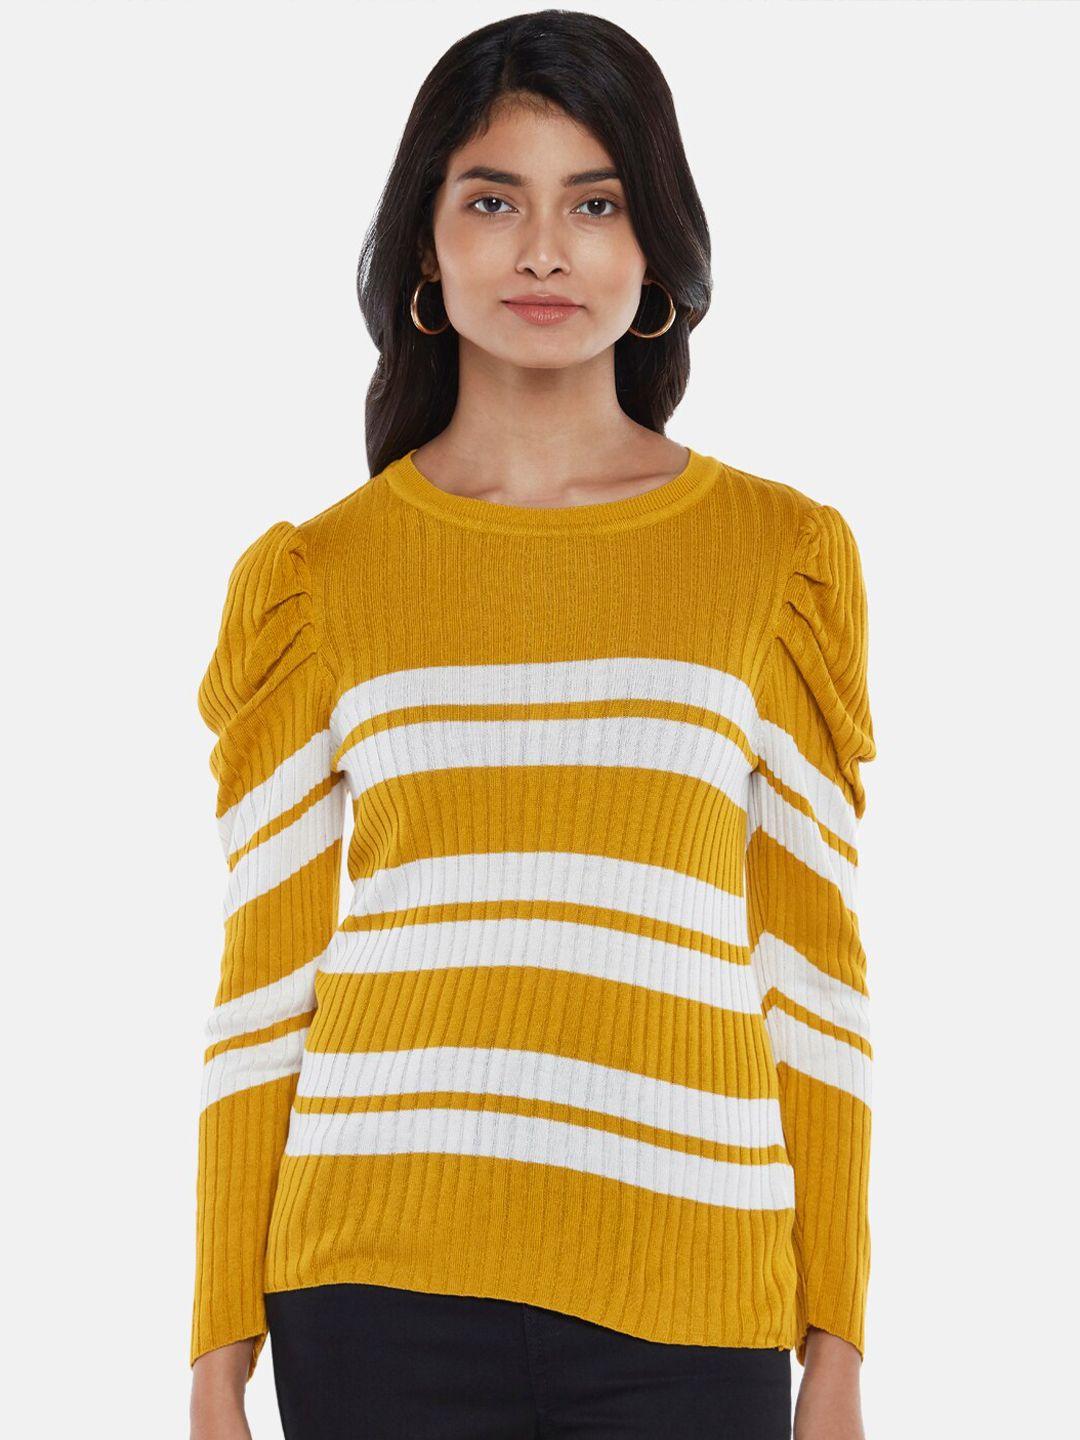 honey by pantaloons women mustard & white cable knit striped pullover